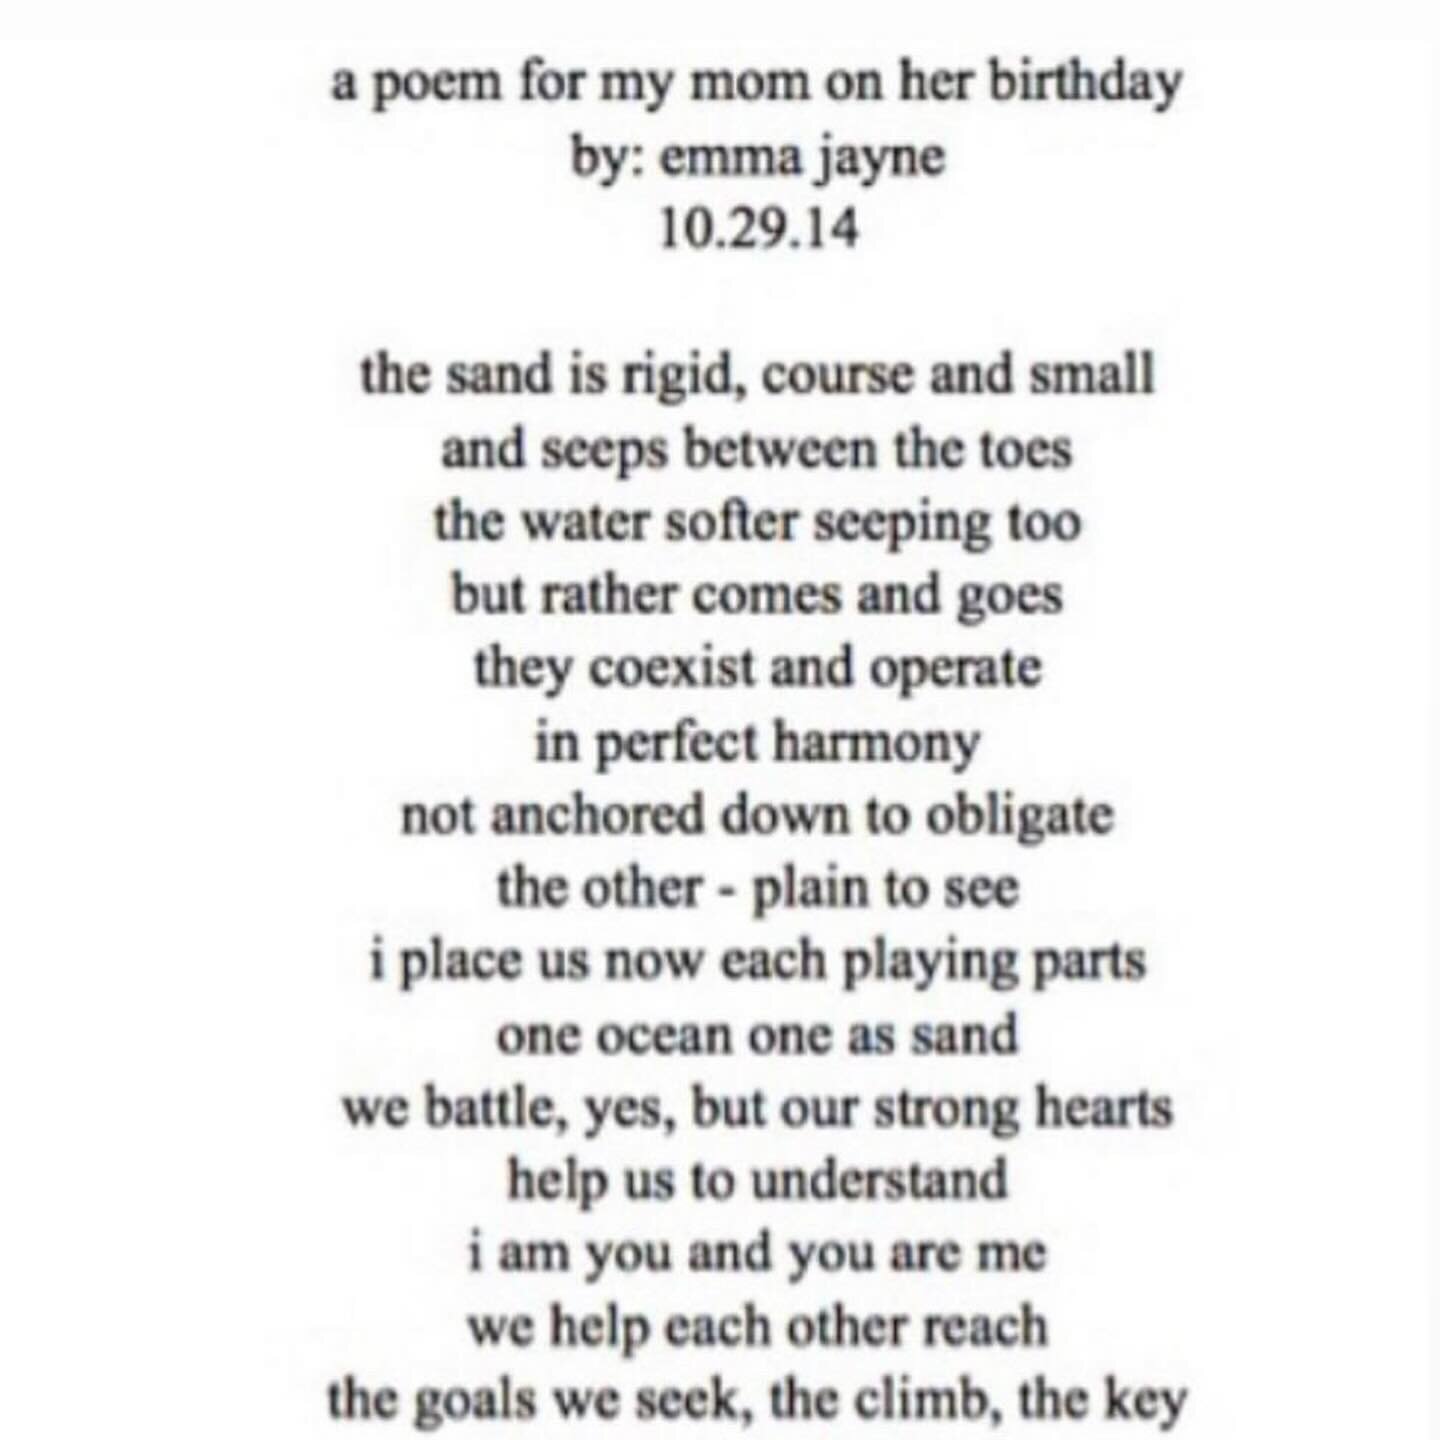 Combing through memories. This one arrived as it should. A poem from my eldest, @emmajaynegrams in 2014. She was 17. That push-pull of moving away and wanting to be a kid and also independent. The sea change. 

I remember this time of year. In my bon